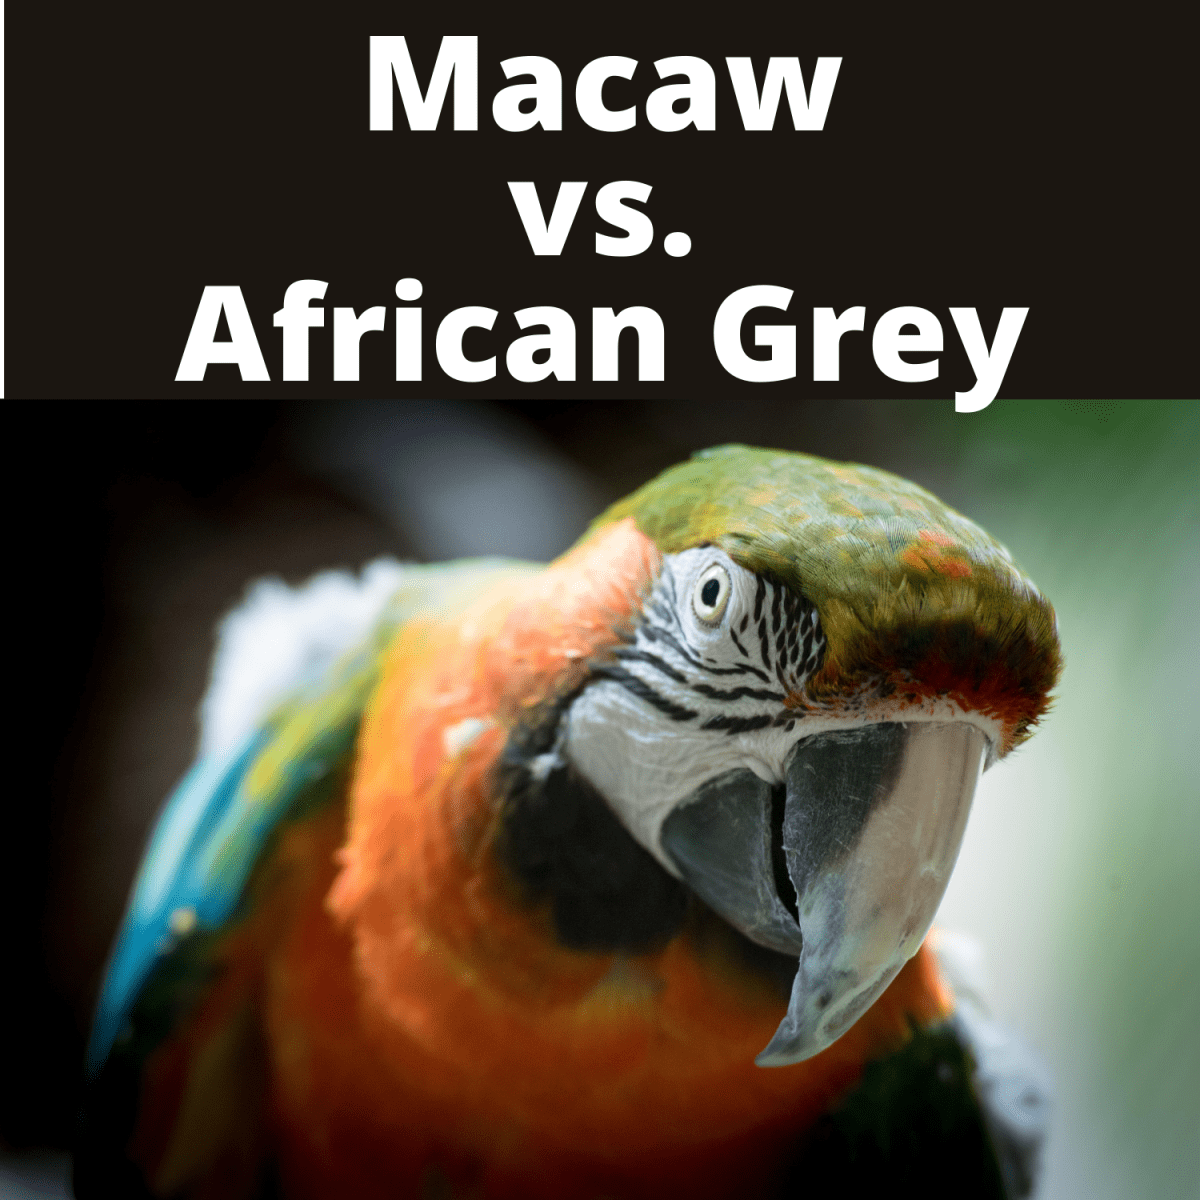 Should I Buy a Macaw or an African Grey? - PetHelpful